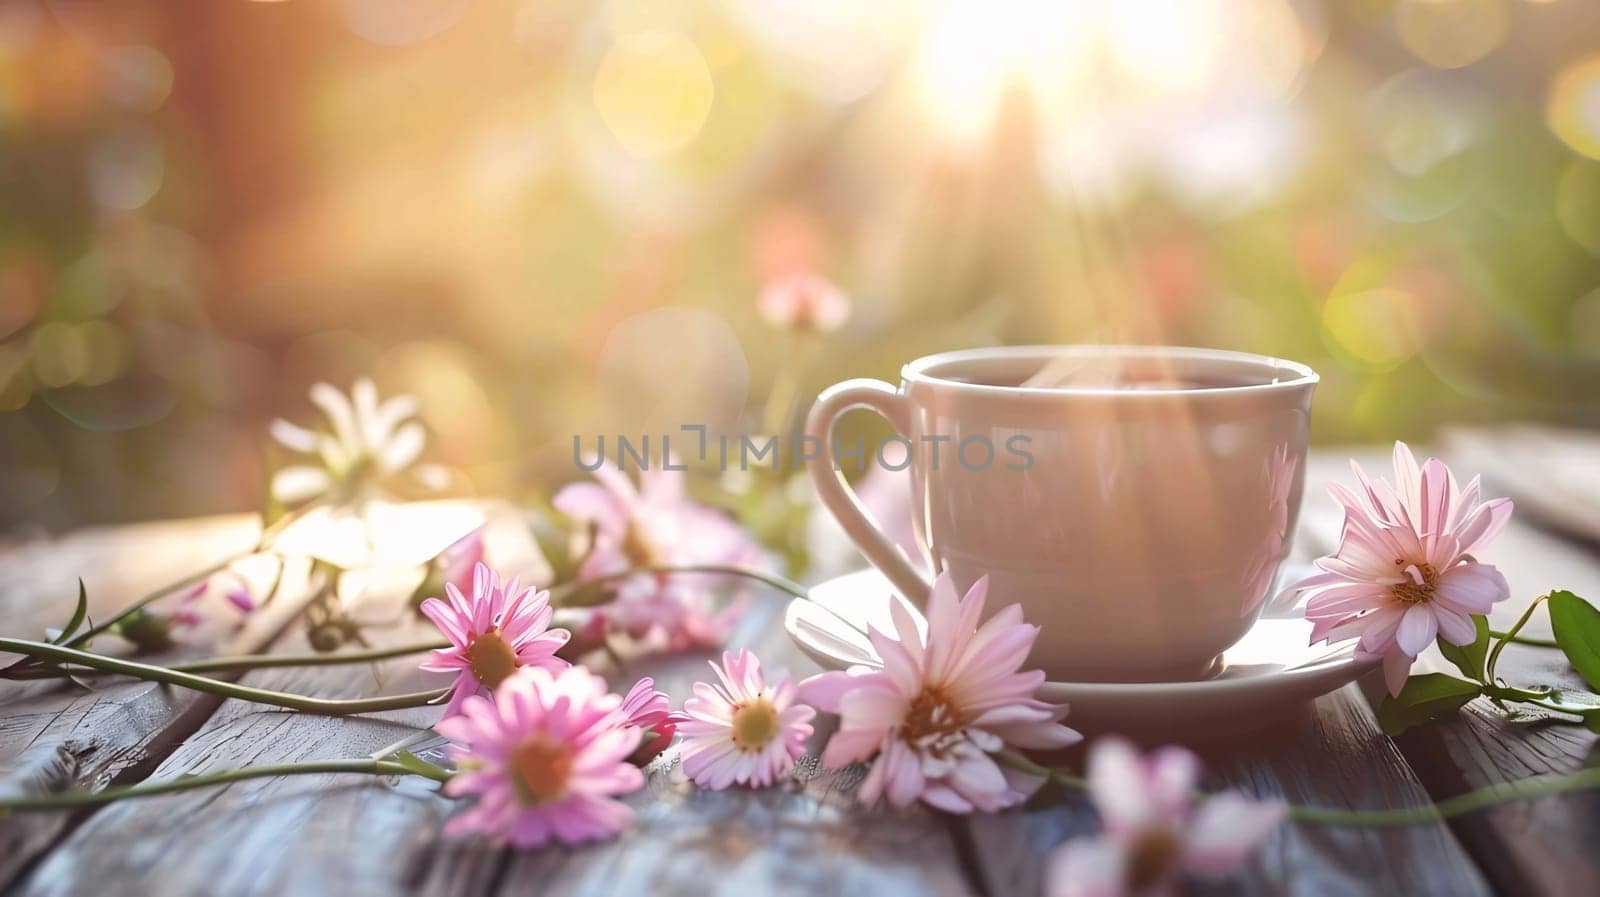 Cup of coffee on a plate on wooden boards around pink flowers, Blurred green background. Flowering flowers, a symbol of spring, new life. A joyful time of nature waking up to life.